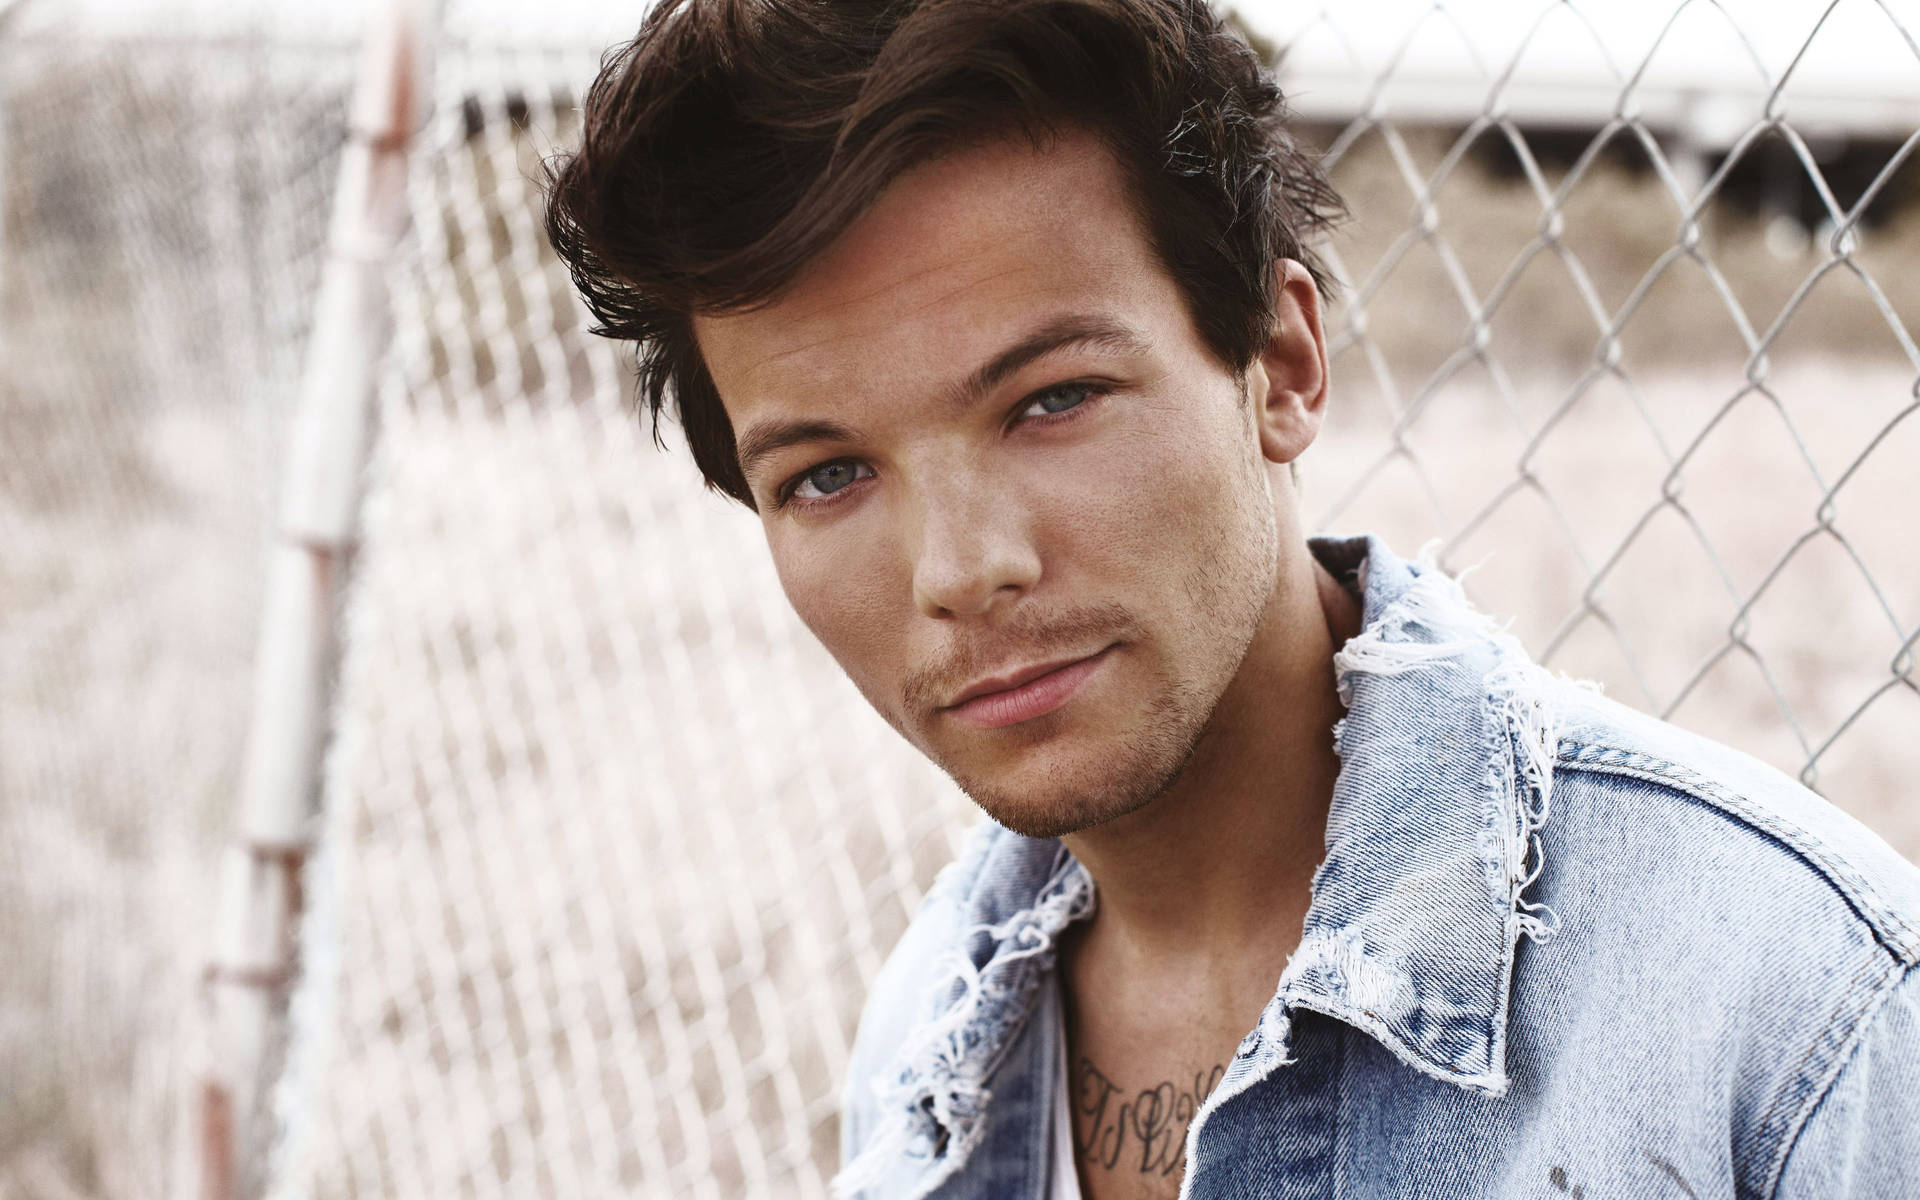 Louis Tomlinson Looking Stylish In A Jean Jacket Background